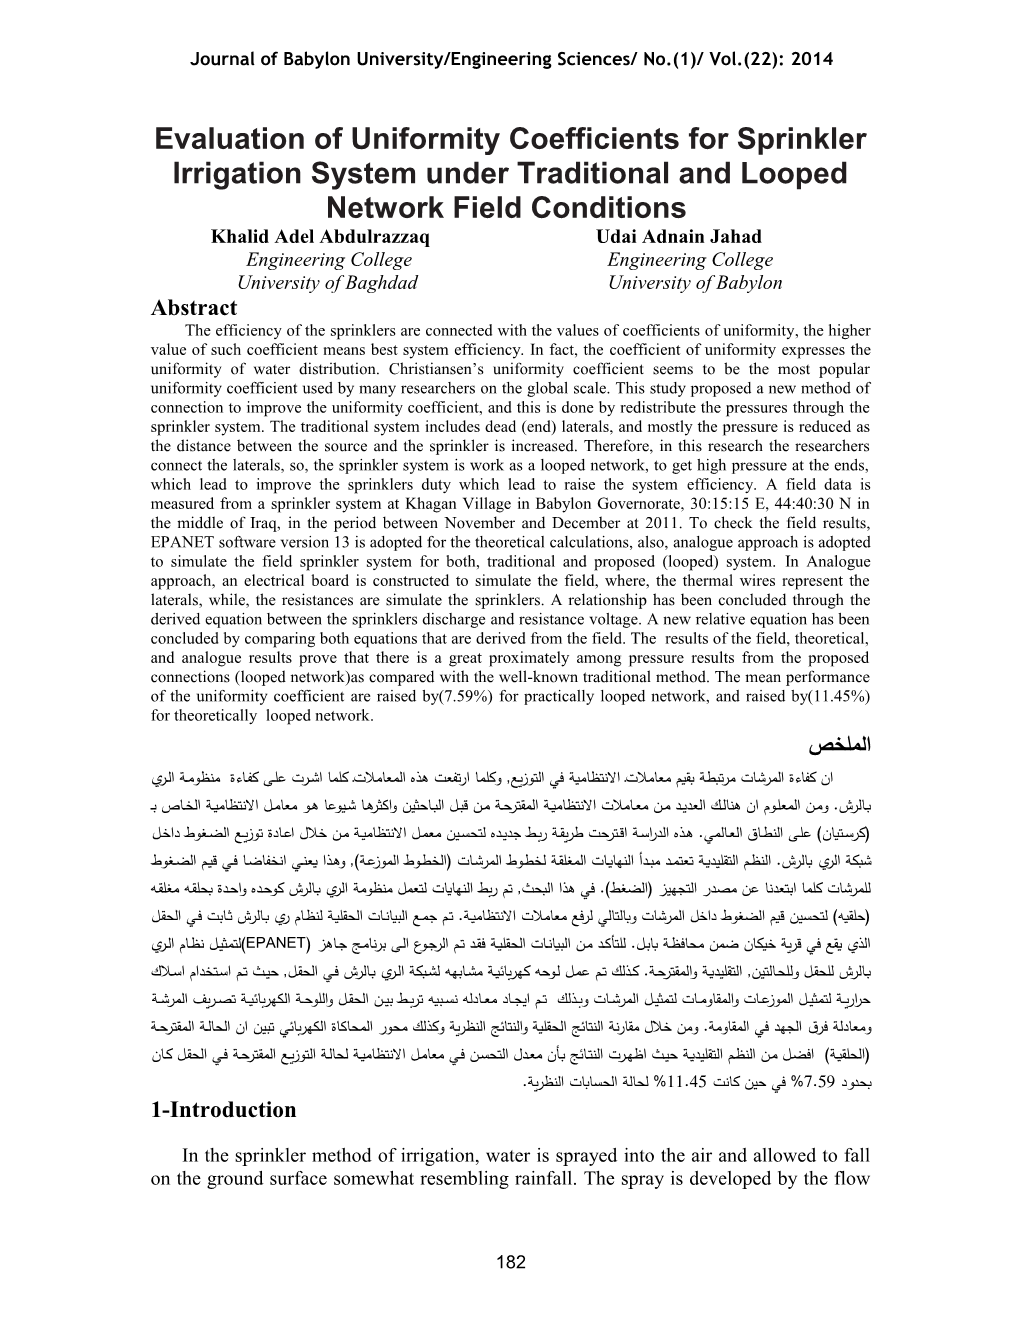 Evaluation of Uniformity Coefficients for Sprinkler Irrigation System Under Traditional